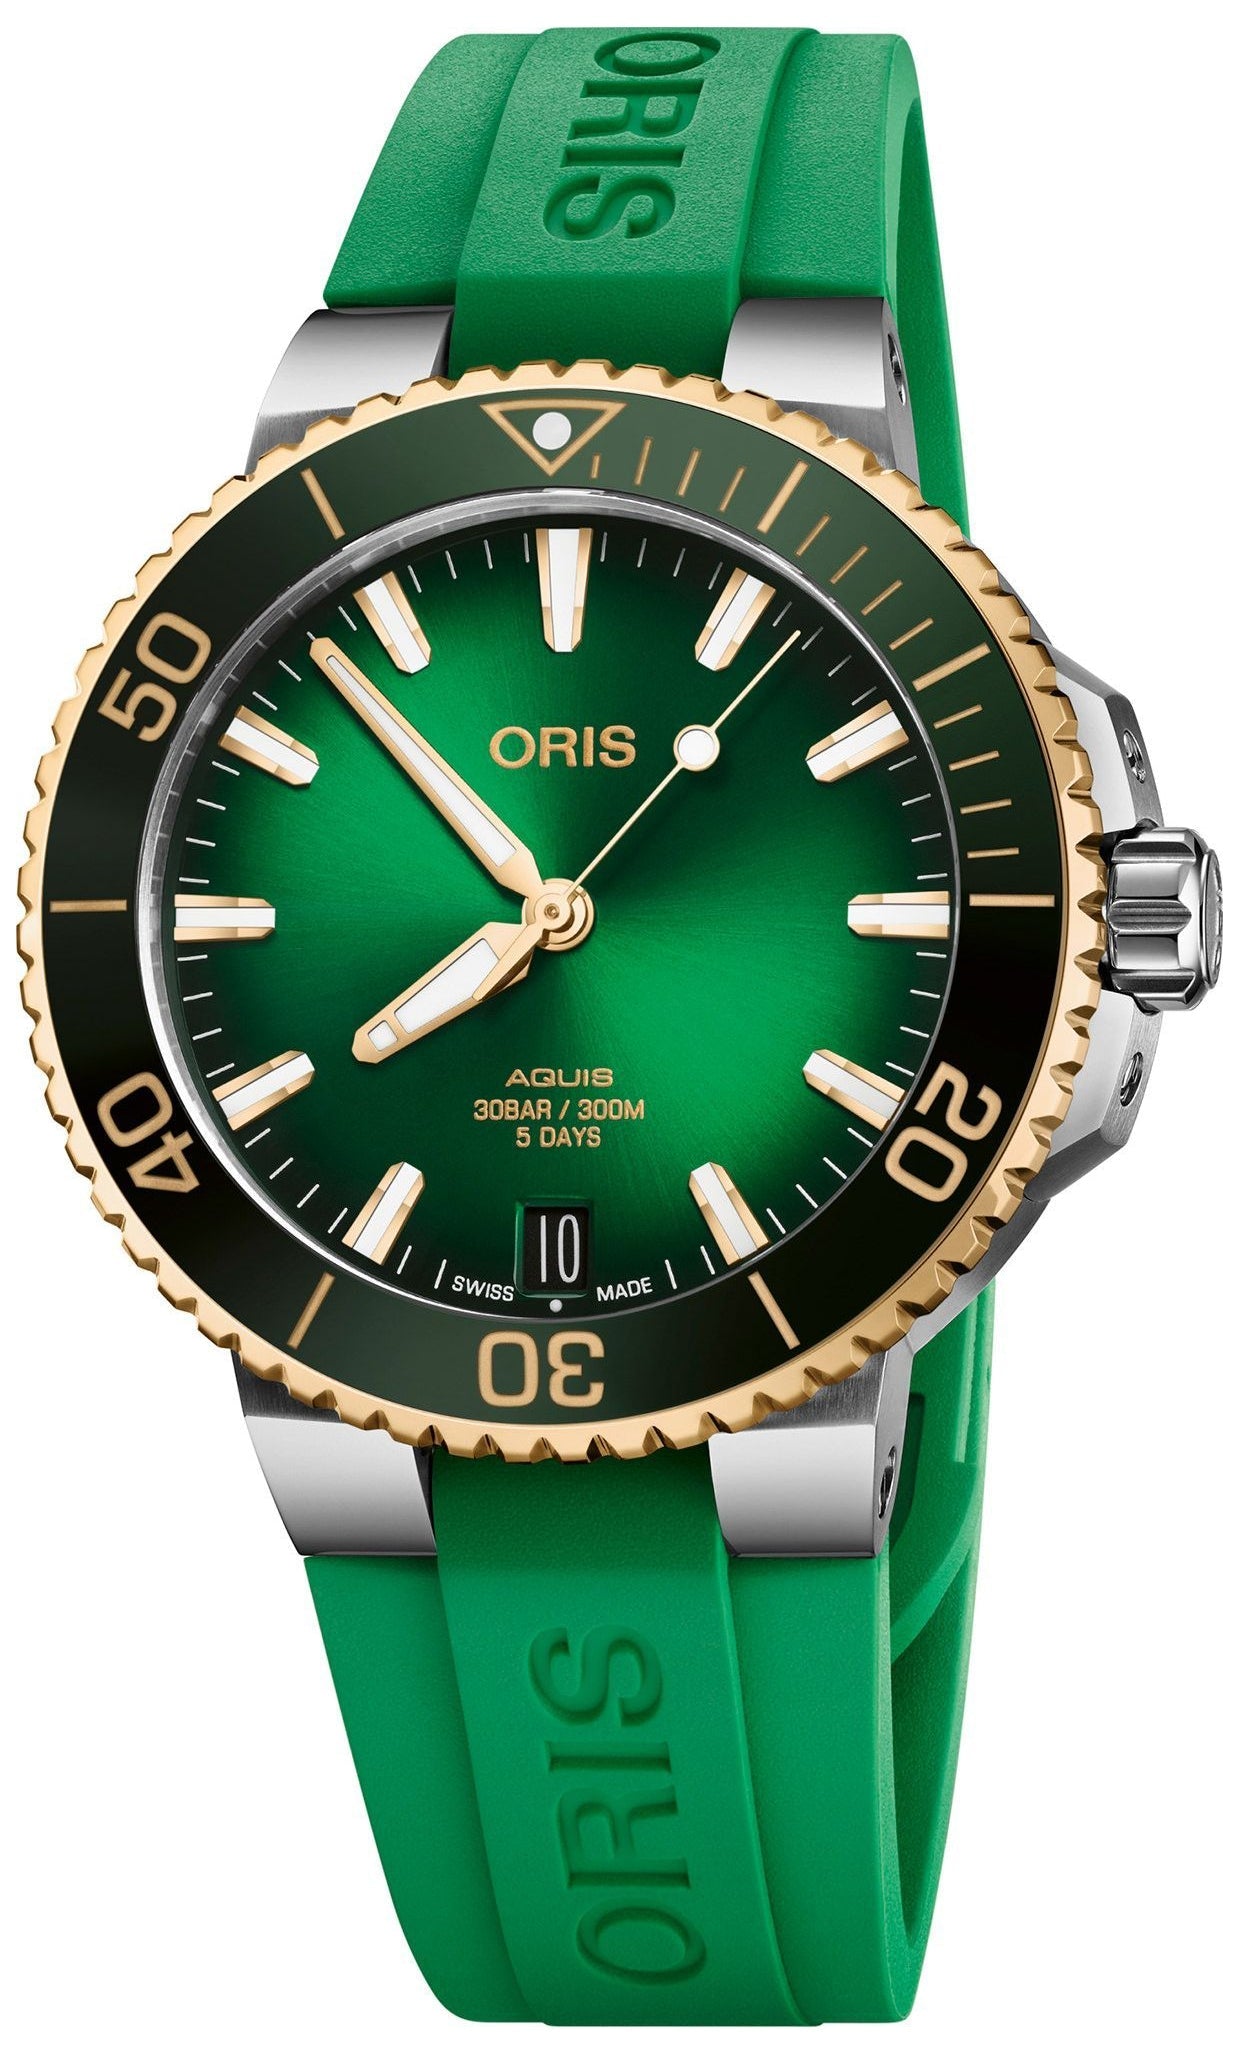 update alt-text with template Watches - Mens-Oris-400 7769 6357-RS-40 - 45 mm, Aquis, date, divers, green, mens, menswatches, new arrivals, Oris, round, rpSKU_400 7769 6355-MB, rpSKU_400 7769 6355-RS, rpSKU_400 7769 6357-MB, rpSKU_400 7772 4054-MB, rpSKU_400 7778 7153-MB, rubber, swiss automatic, two-tone case, uni-directional rotating bezel, watches-Watches & Beyond